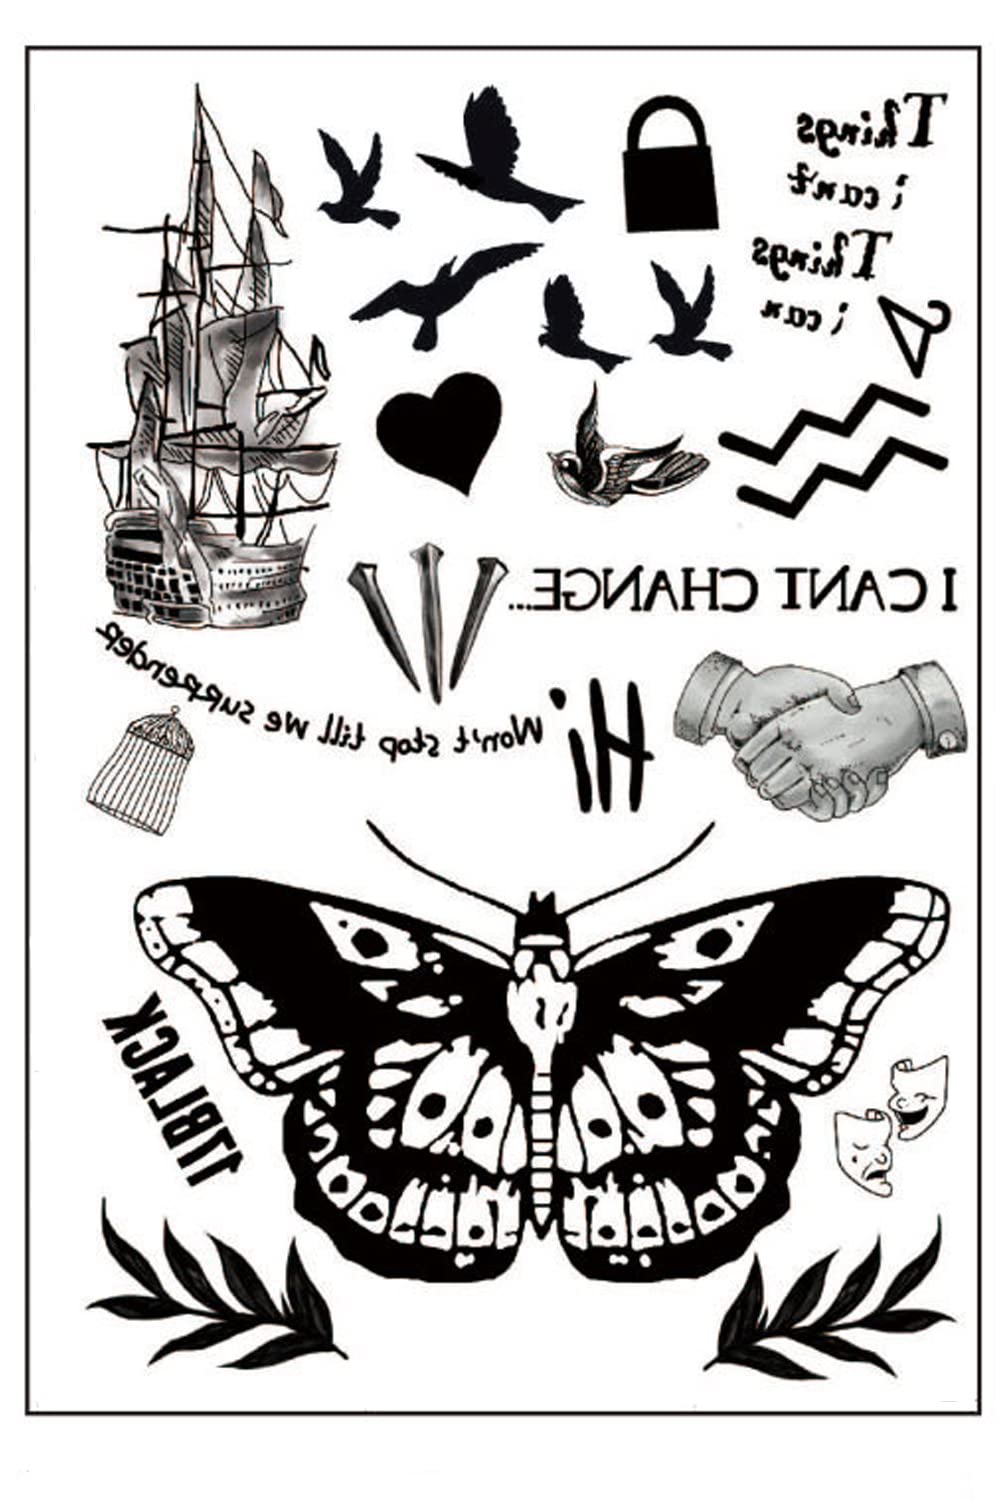 Cosplay Tats Harry Inspired Temporary Tattoo Bundle - Over 65 Tats -  Several Styles - Harry Costume/Cosplay - MADE IN USA